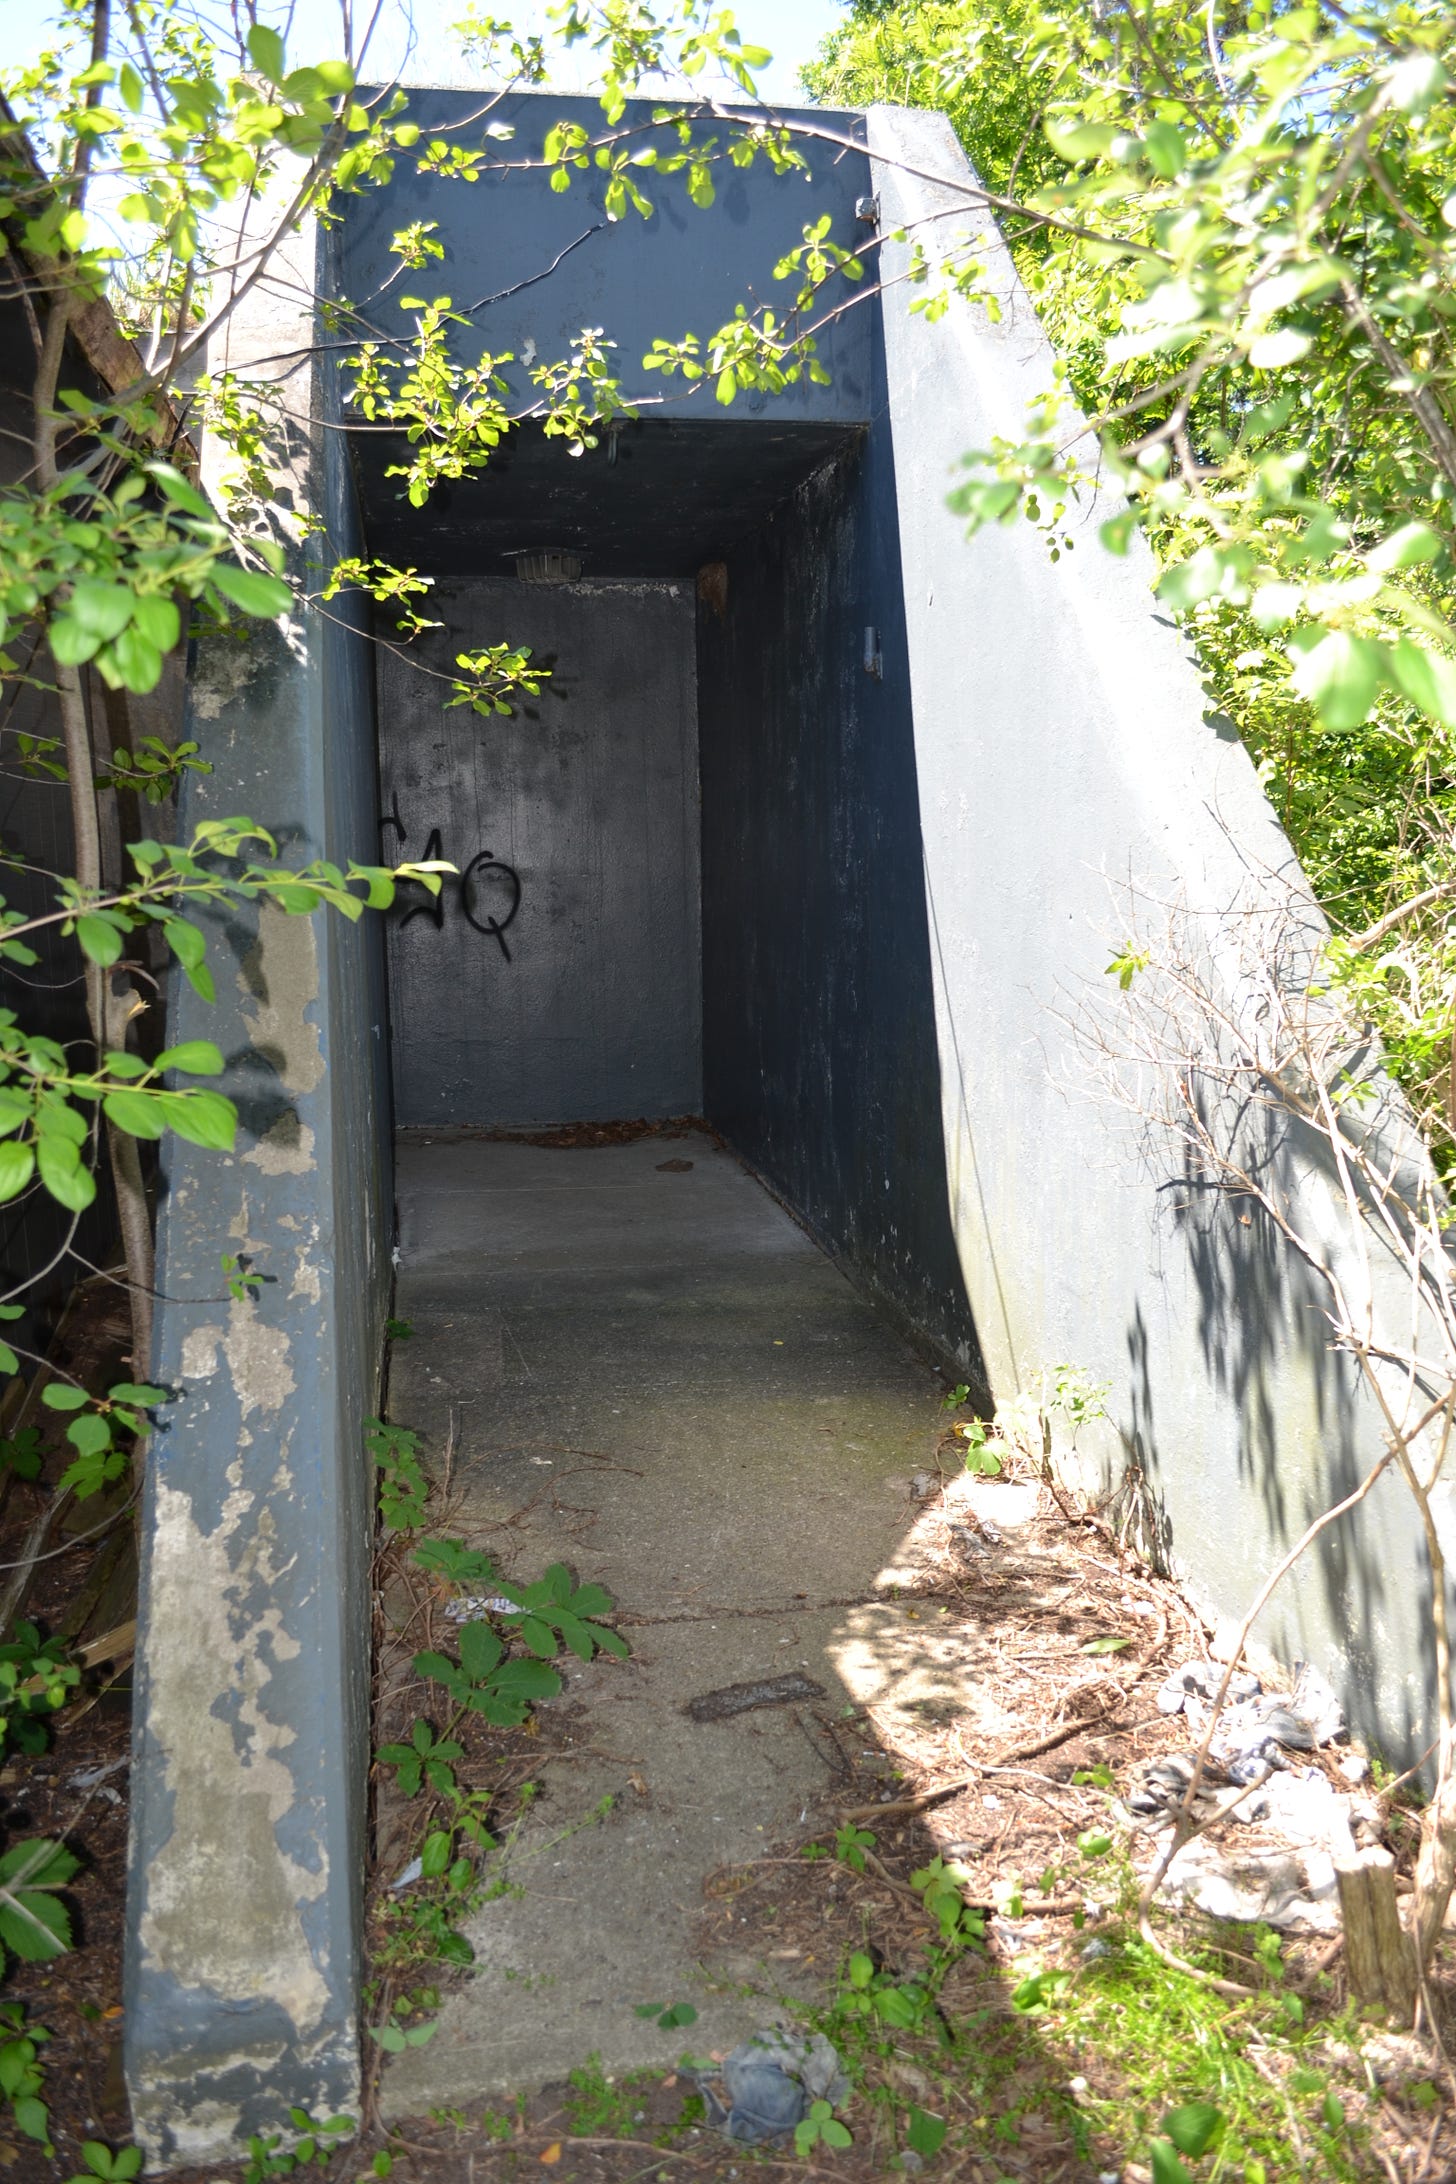 Concrete entrance to stairwell down into the Waterloo County bunker